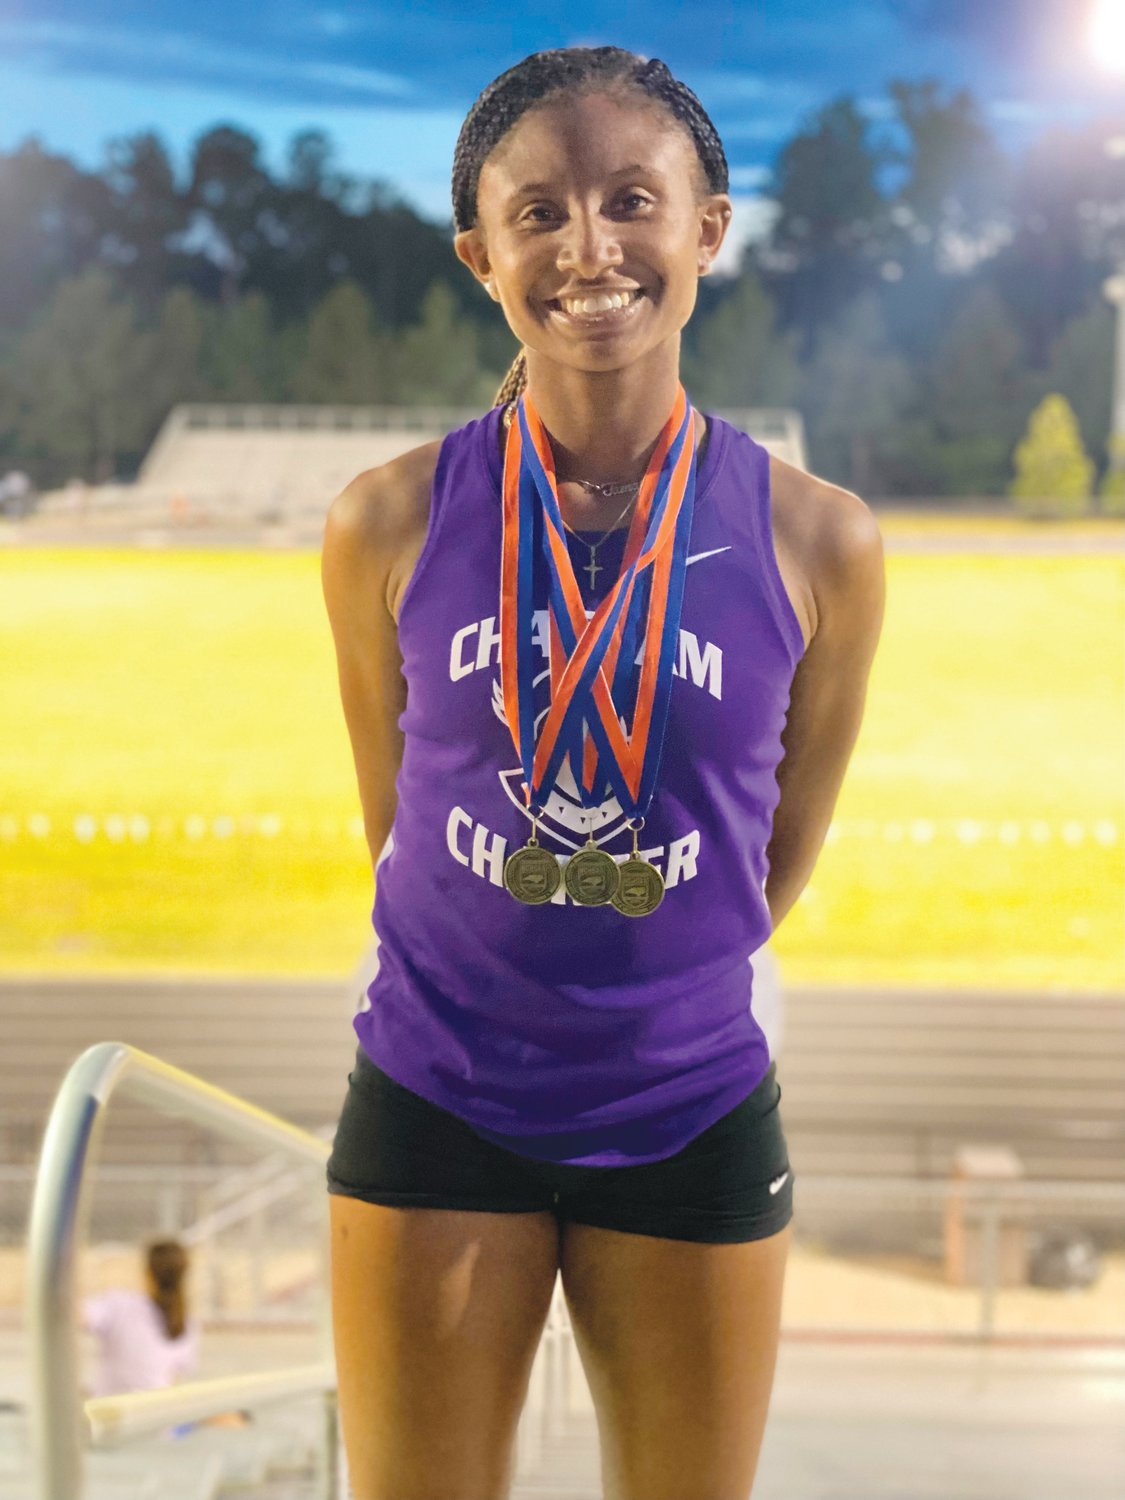 Chatham Charter junior Tamaya Walden poses with her three gold medals following her performance at the NCHSAA 1A Mideast Regionals at Franklinton High School on Saturday. Walden took first place in the women's 100-, 200- and 400-meter dashes, qualifying for states in all three events.